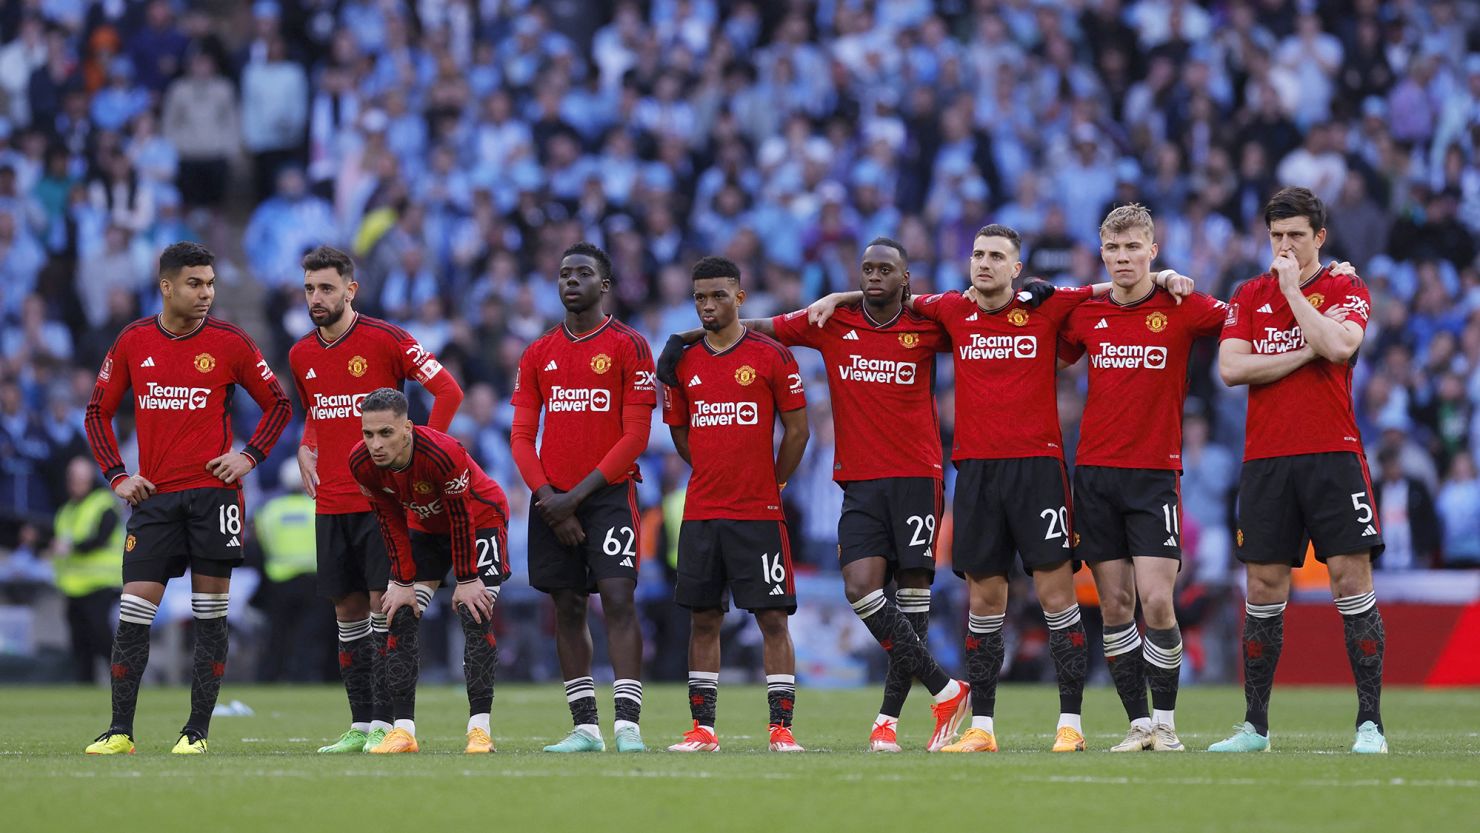 Manchester United won the FA Cup semifinal against Coventry City after a poor performance.